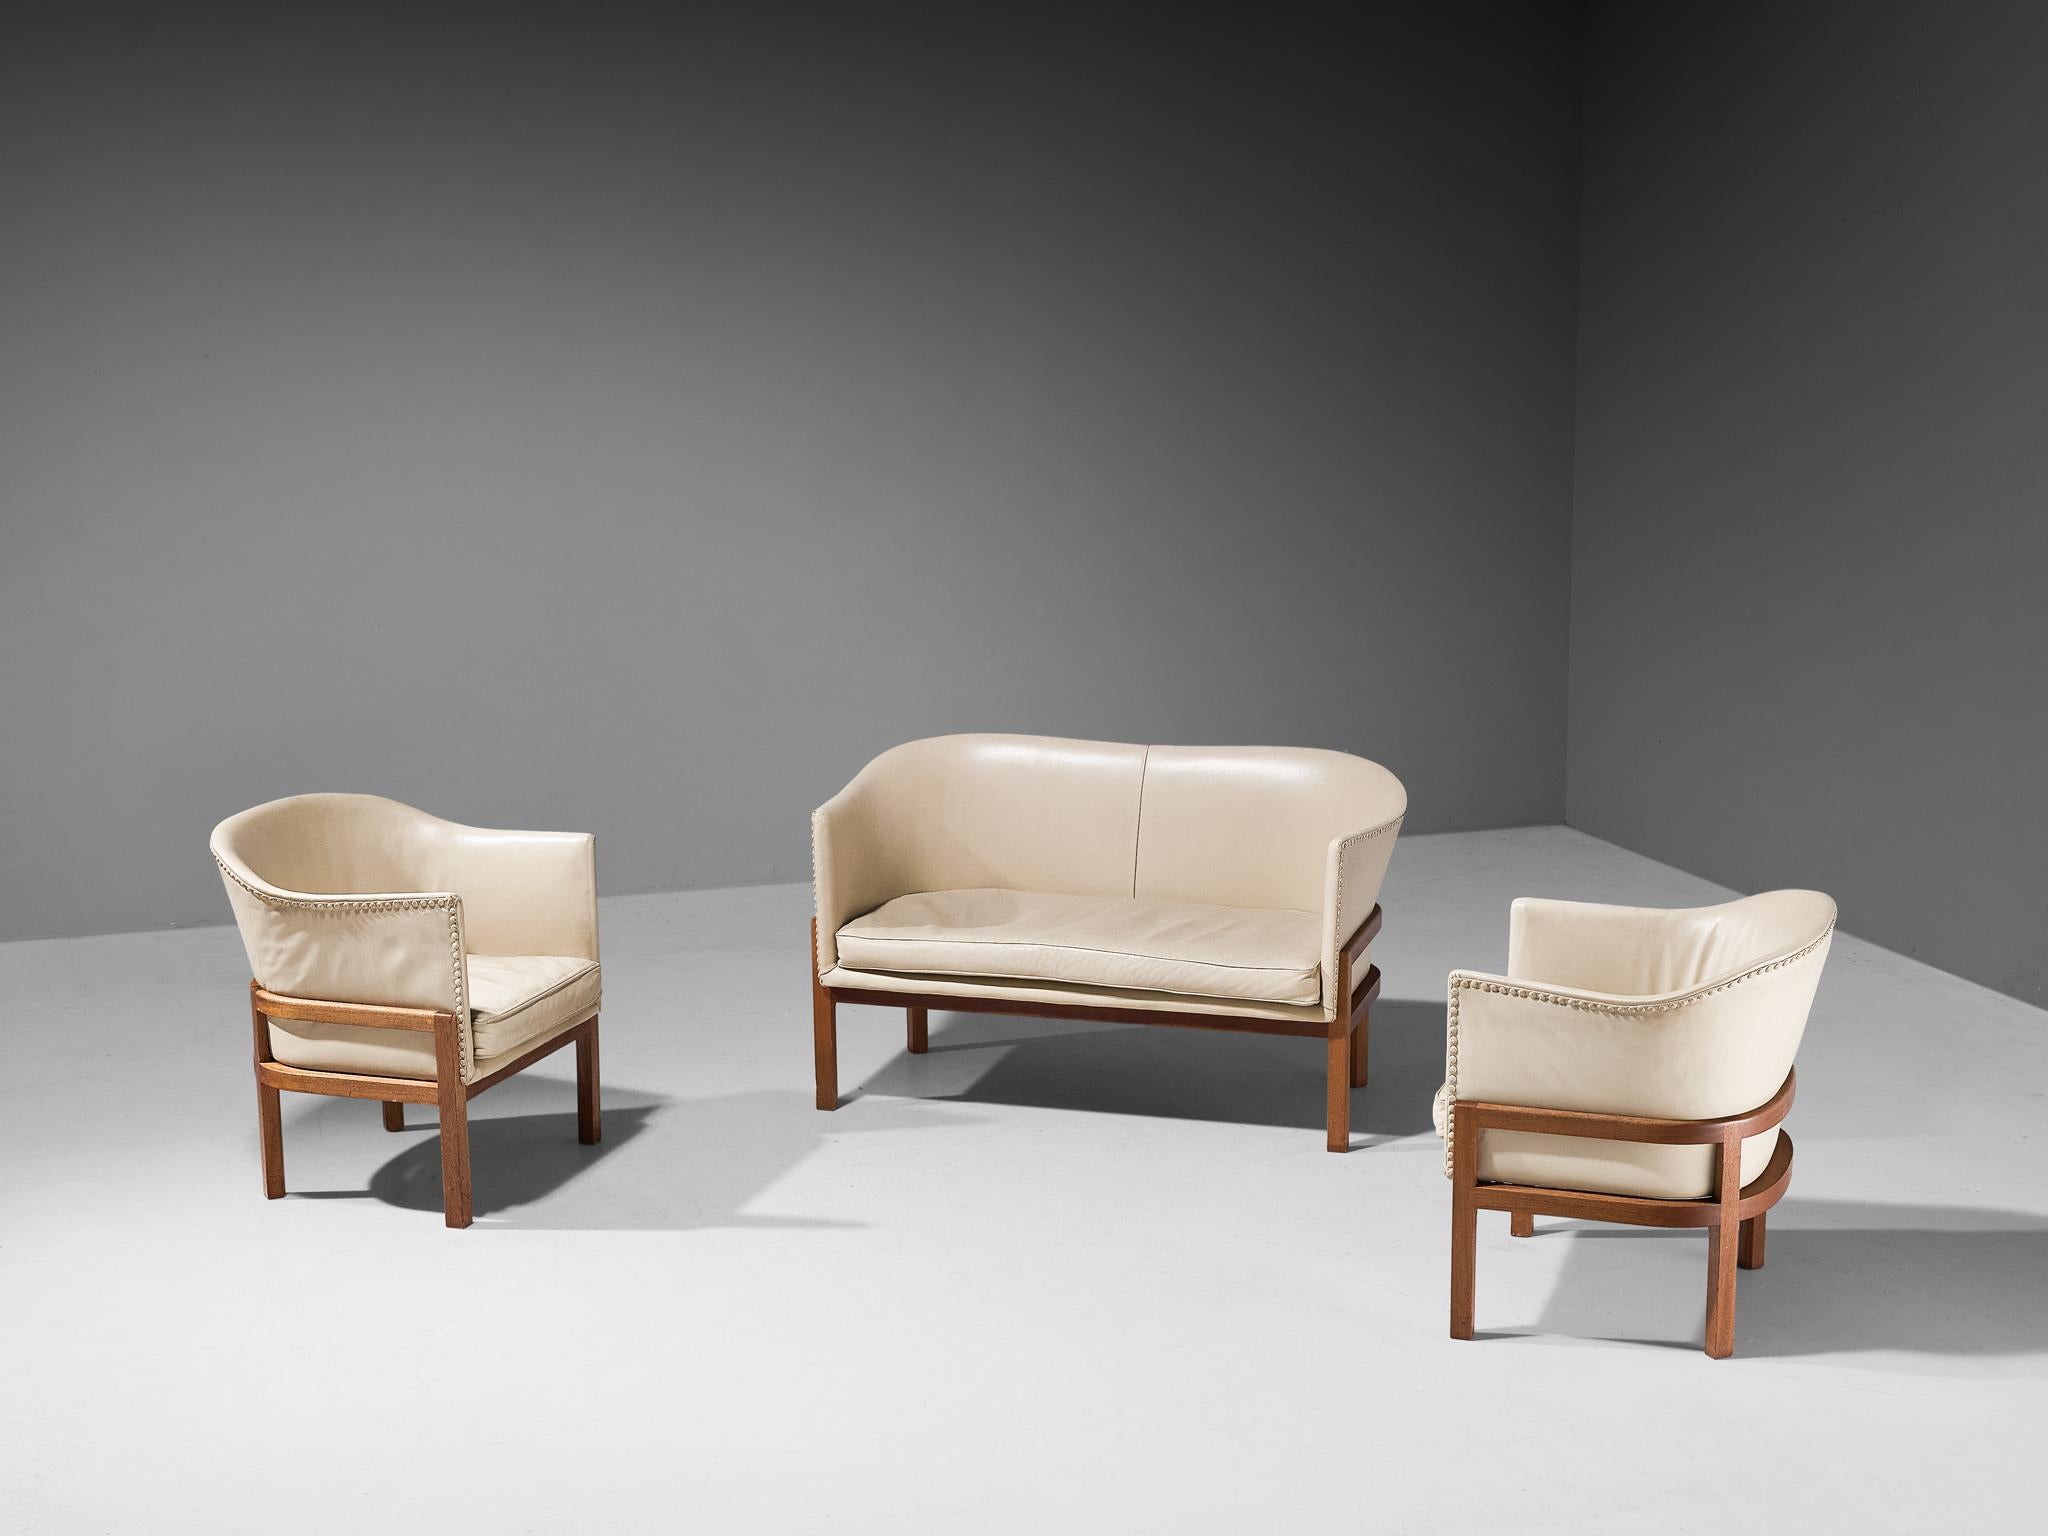 Mogens Koch for Ivan Schlechter, 'Kamin' living room set consisting of one sofa and pair of armchairs, model MK51, mahogany, leather, Denmark, design 1936, manufactured after 1951 

Mogens Koch's 'Kamin' living room set is inspired by Kaare Klint's